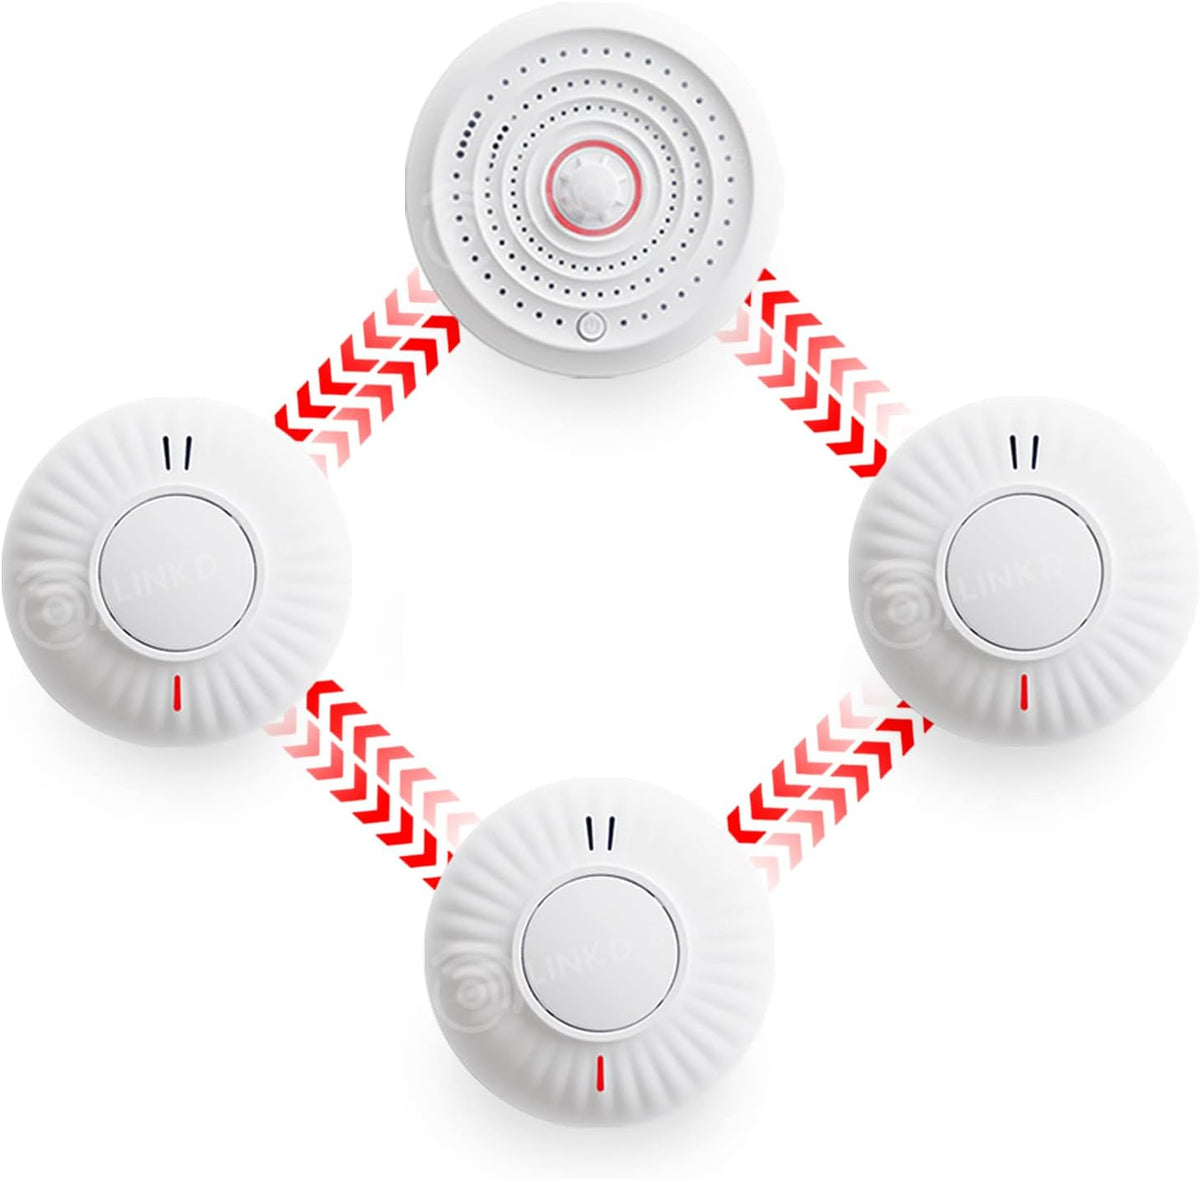 Wireless Interlinked Smoke & Heat Alarm Bundle | Scotland & England Law Compliant | 10 Year Battery Life | CE & BS Certified | LINKD Alarms | Pre Linked | Easy Set Up | UK Phone & Email Support